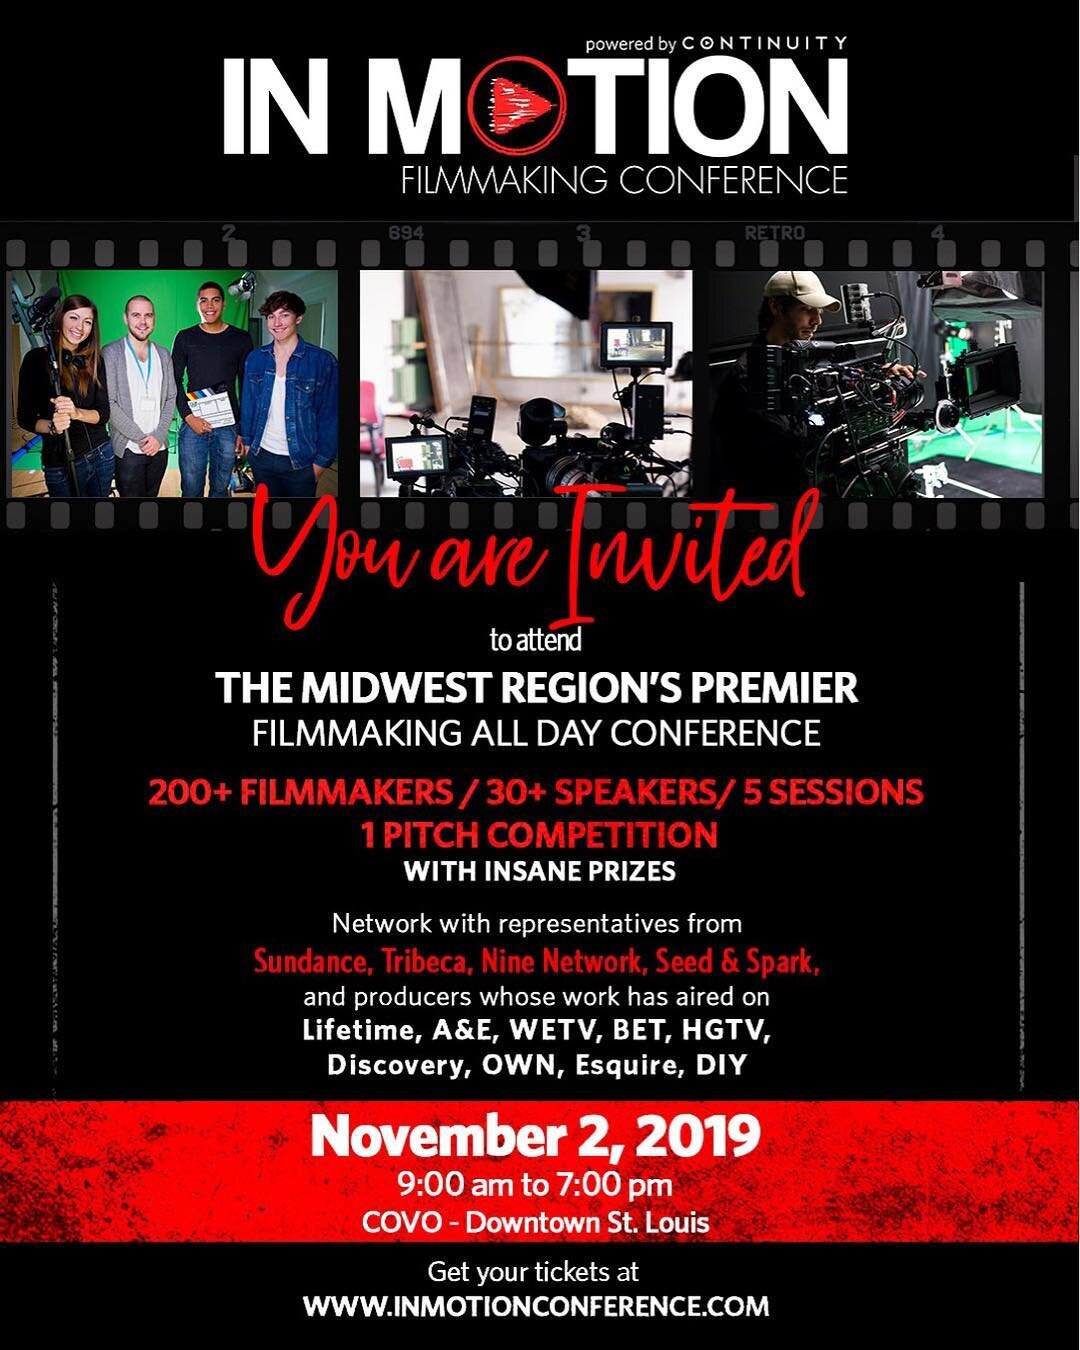 Have you heard about @inmotionconference? So many incredible speakers. If you are a filmmaker in the Midwest, the pitch fest alone is a great reason to be here if nothing else.